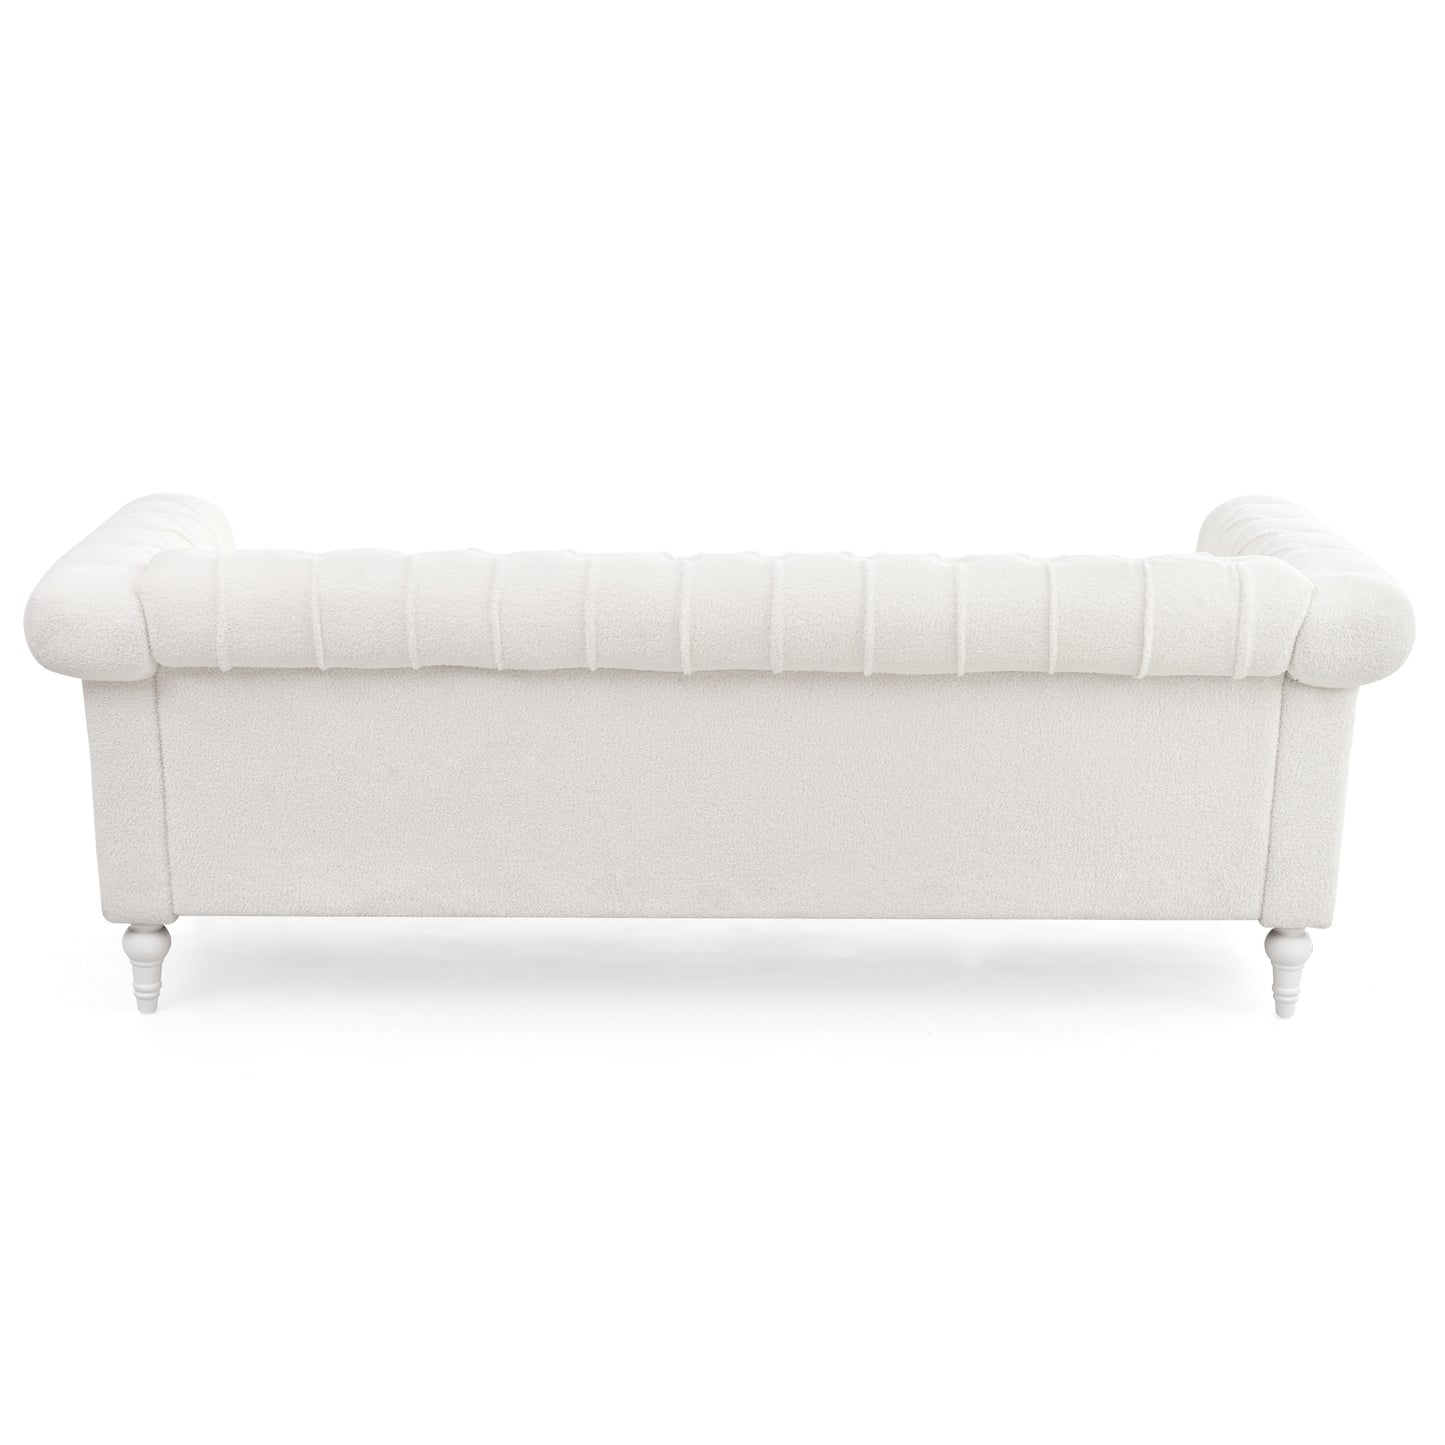 83.66 Inch Width Traditional Square Arm removable cushion 3 seater Sofa